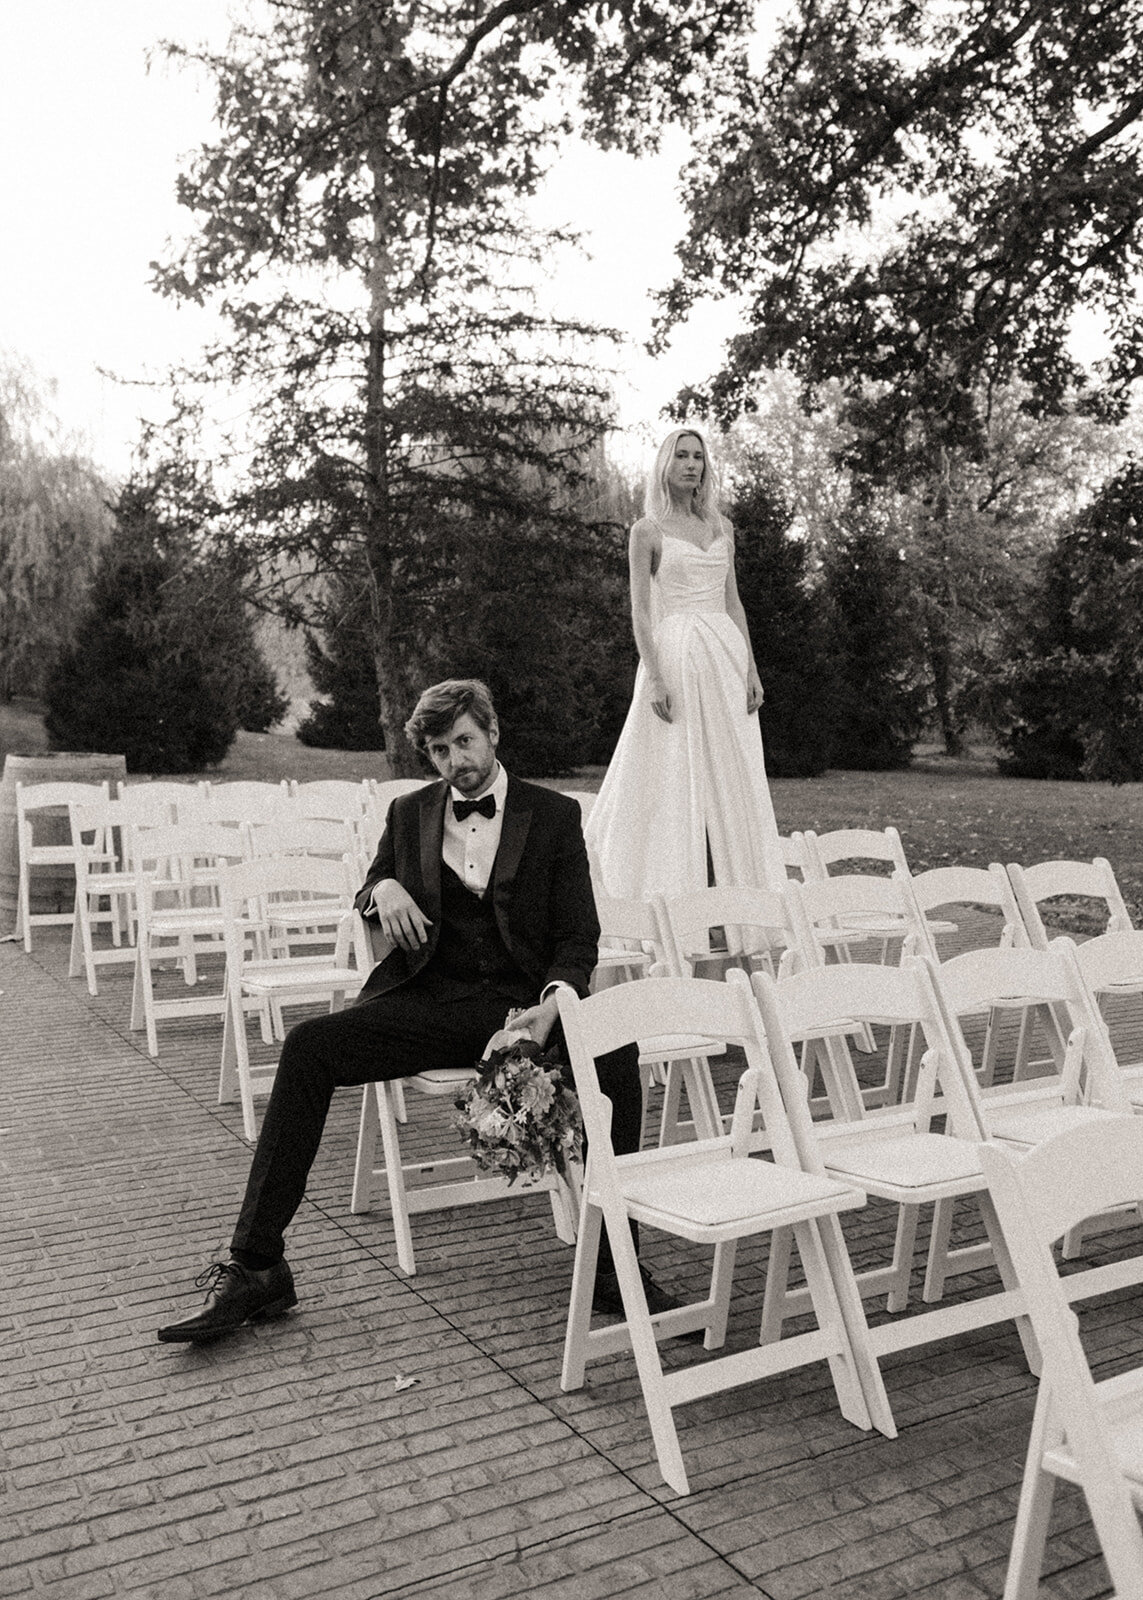 A bride standing and a groom sitting on white chairs outdoors at Park Farm Winery, both dressed in wedding attire, in a black and white photo.